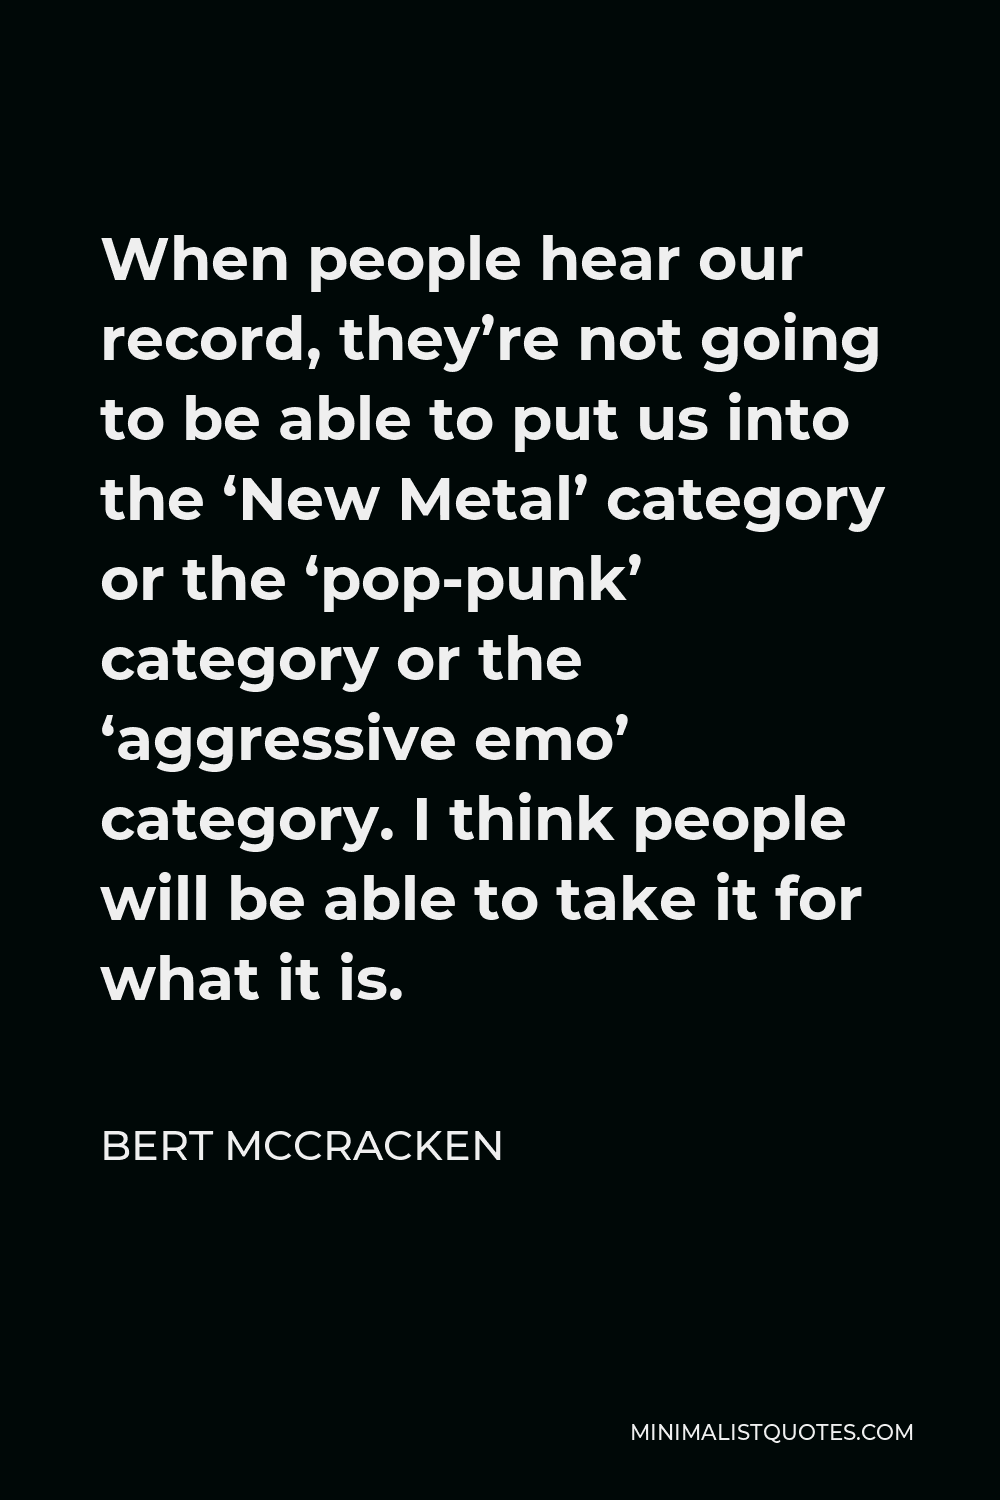 Bert McCracken Quote - When people hear our record, they’re not going to be able to put us into the ‘New Metal’ category or the ‘pop-punk’ category or the ‘aggressive emo’ category. I think people will be able to take it for what it is.